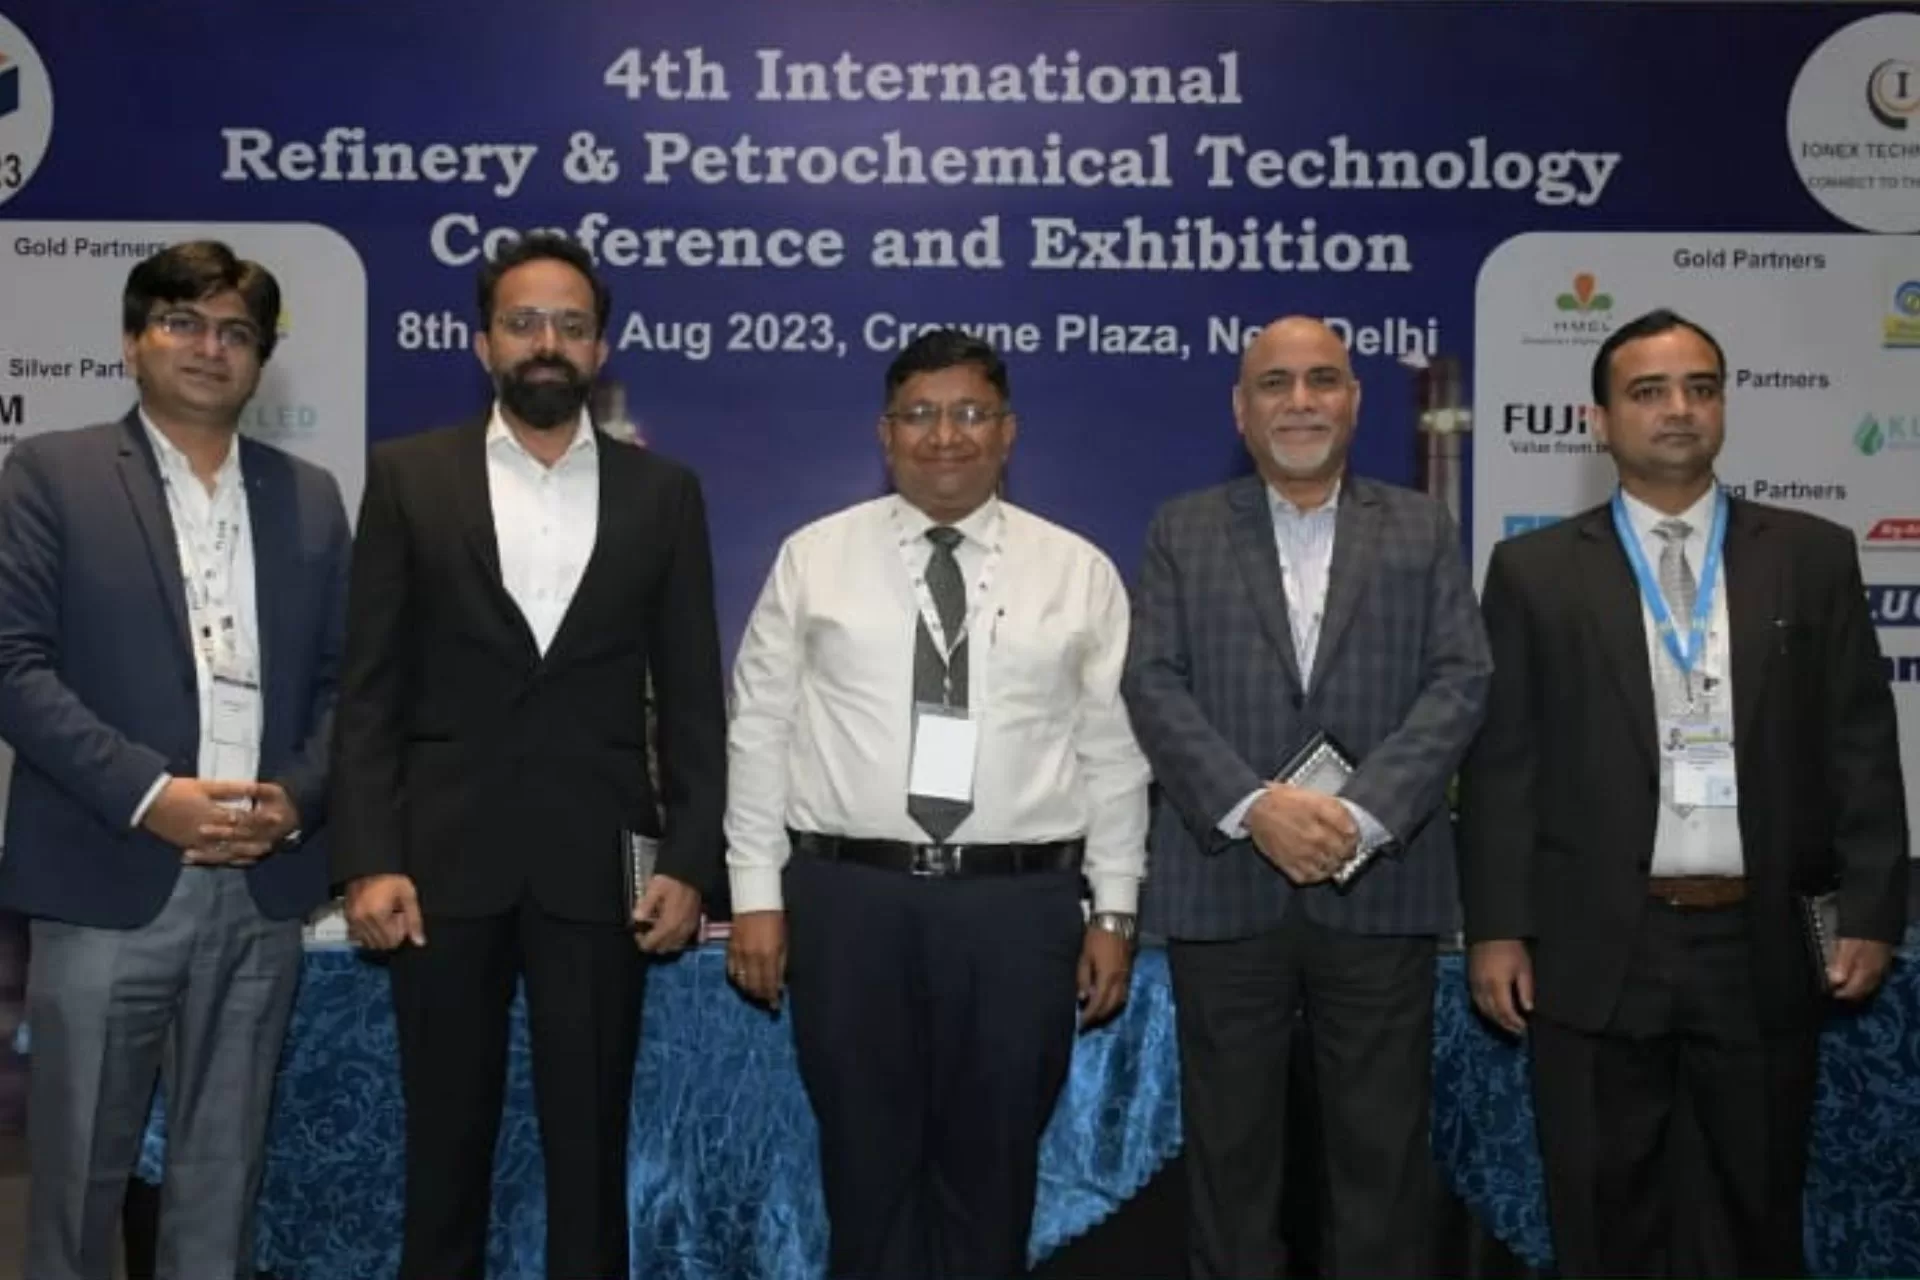 4th International Refinery & Petrochemical Technology Conference